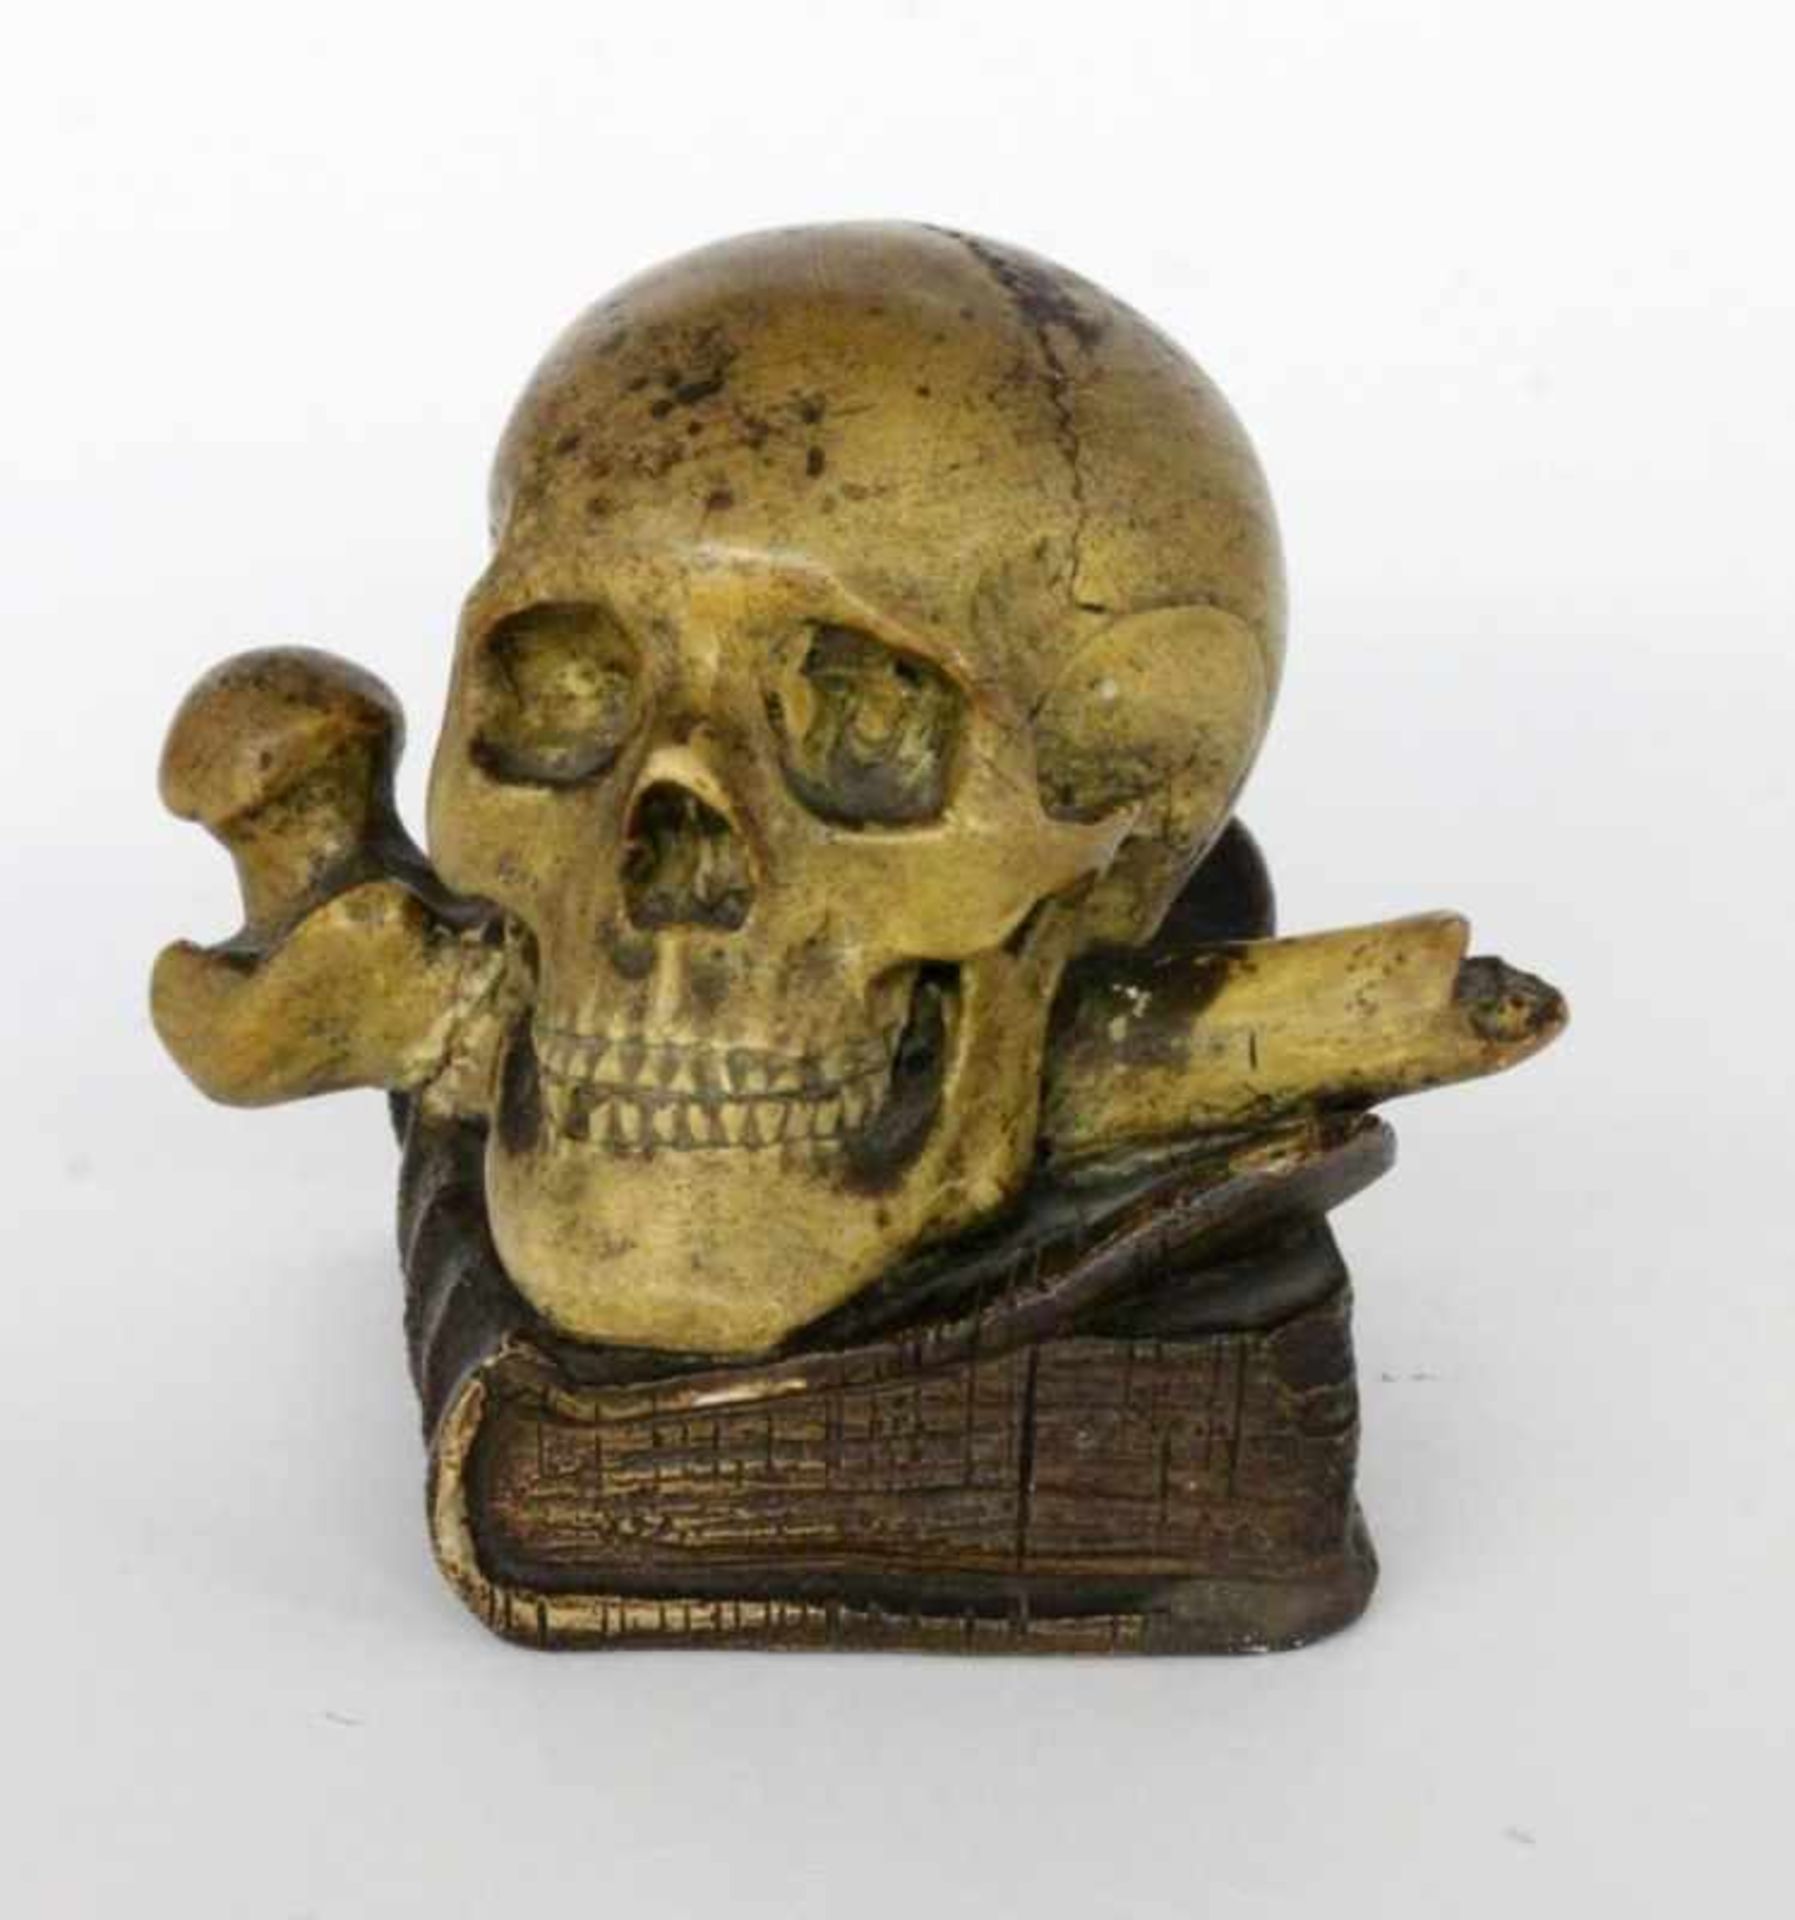 A PAPERWEIGHT WITH SKULL 1st half of 20th century Skull with bones on a book. Terracotta,painted. 11